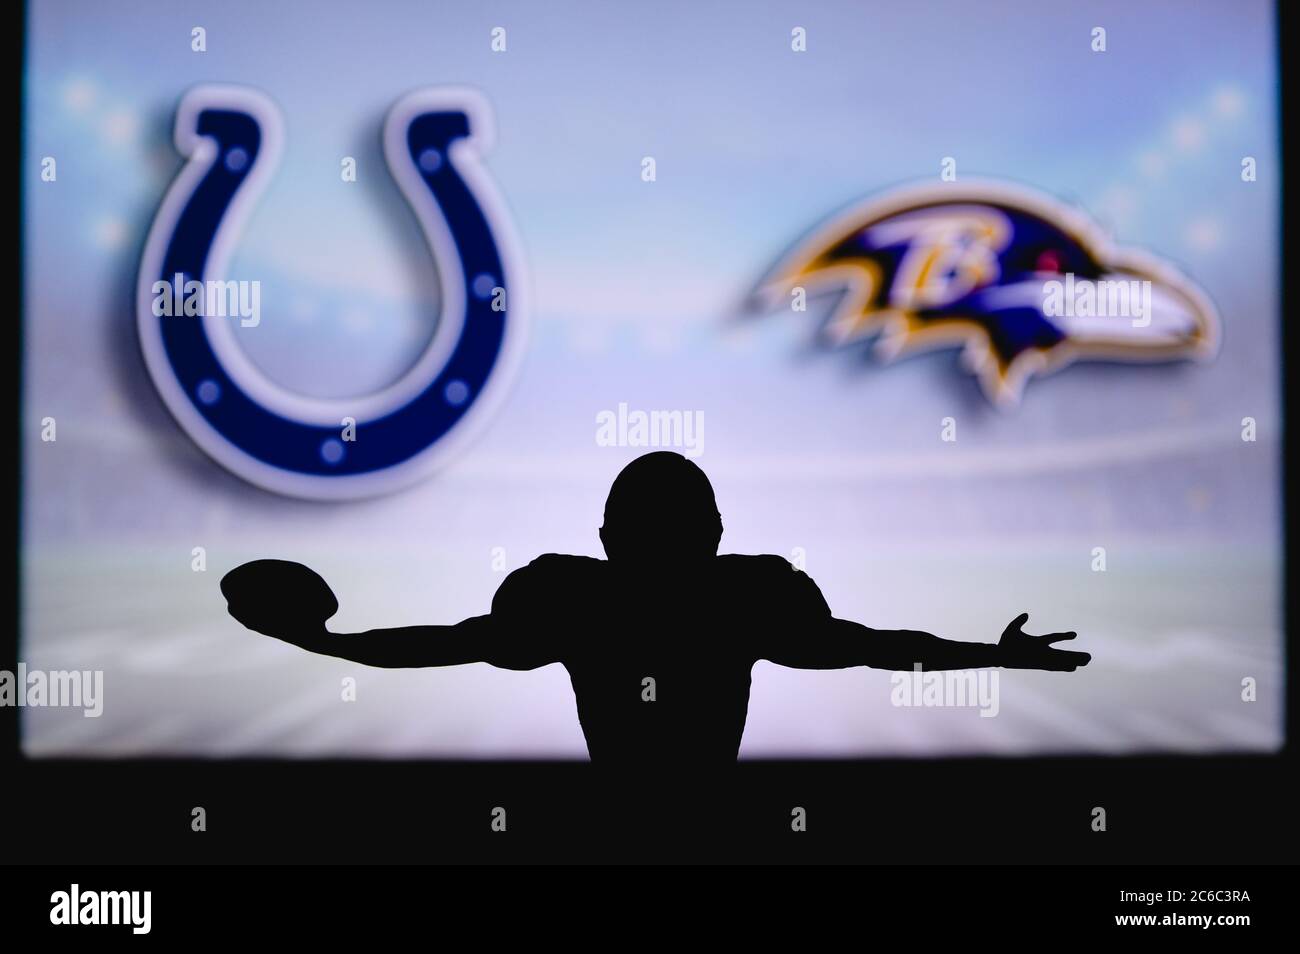 Indianapolis Colts vs. Baltimore Ravens. NFL Game. American Football League match. Silhouette of professional player celebrate touch down. Screen in b Stock Photo